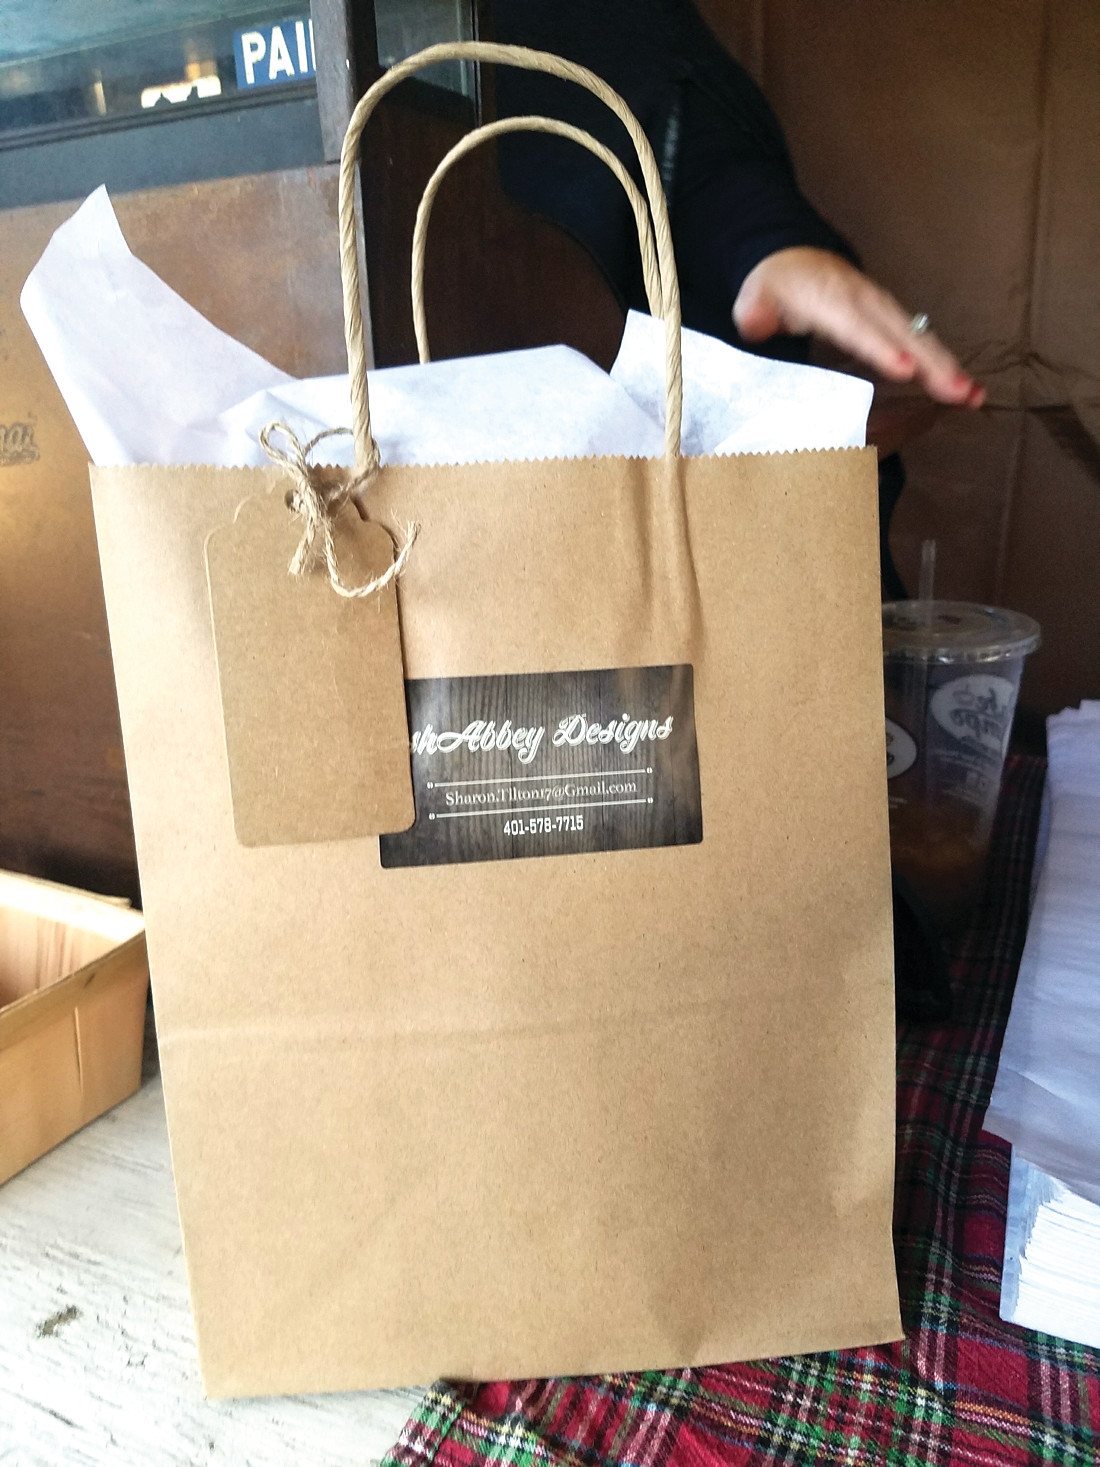 THAT SPECIAL TOUCH: Each item went home with Abbey’s Shabbey Designs signature wrapping and gift bags and a thank-you tag.